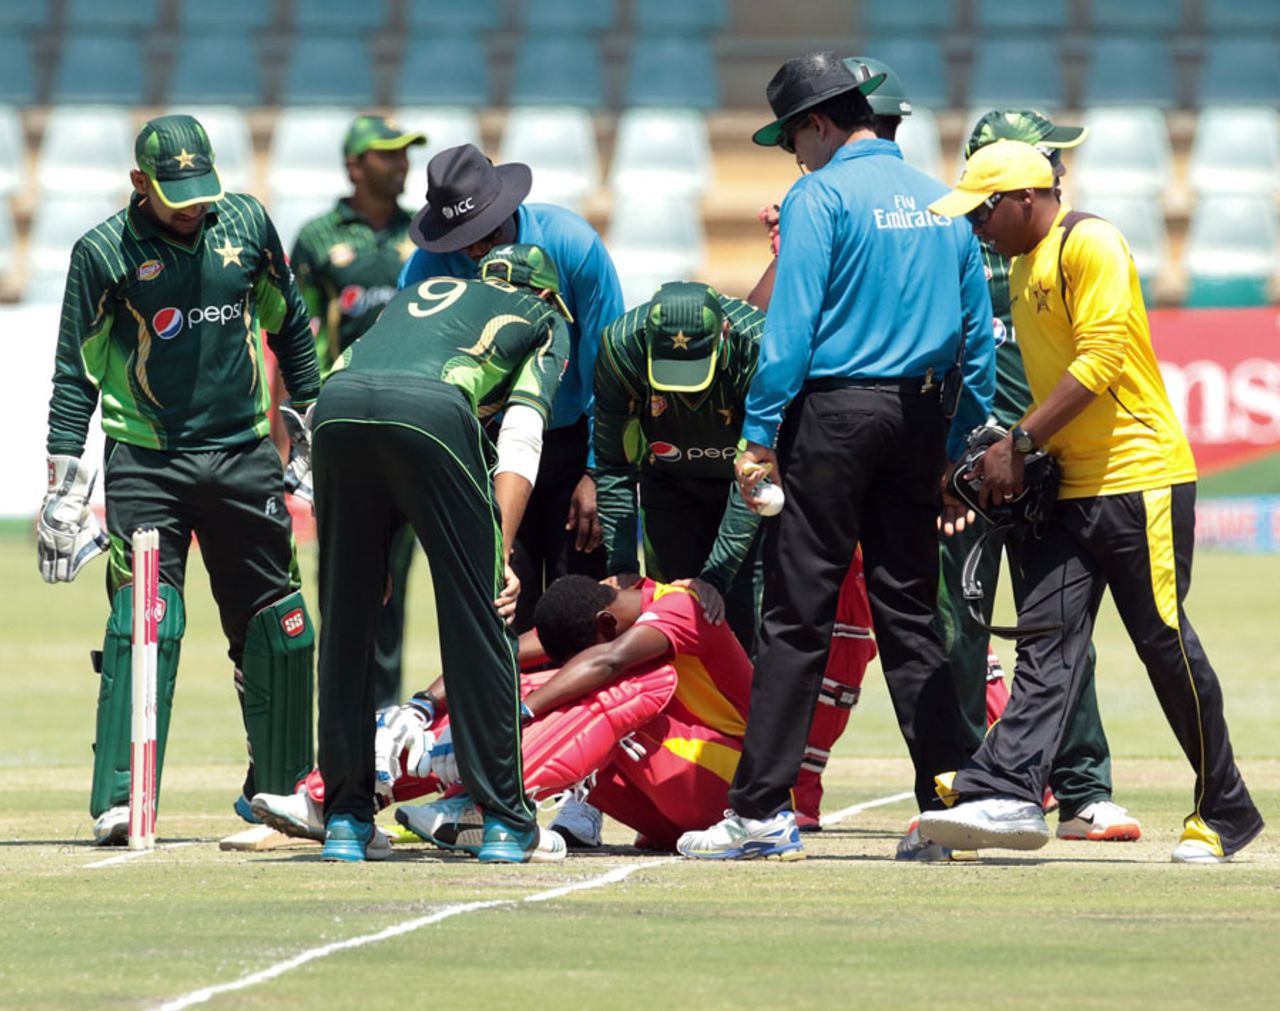 The Pakistan players check on Richmond Mutumbami after he was struck by a bouncer, Zimbabwe v Pakistan, 3rd ODI, Harare, October 5, 2015